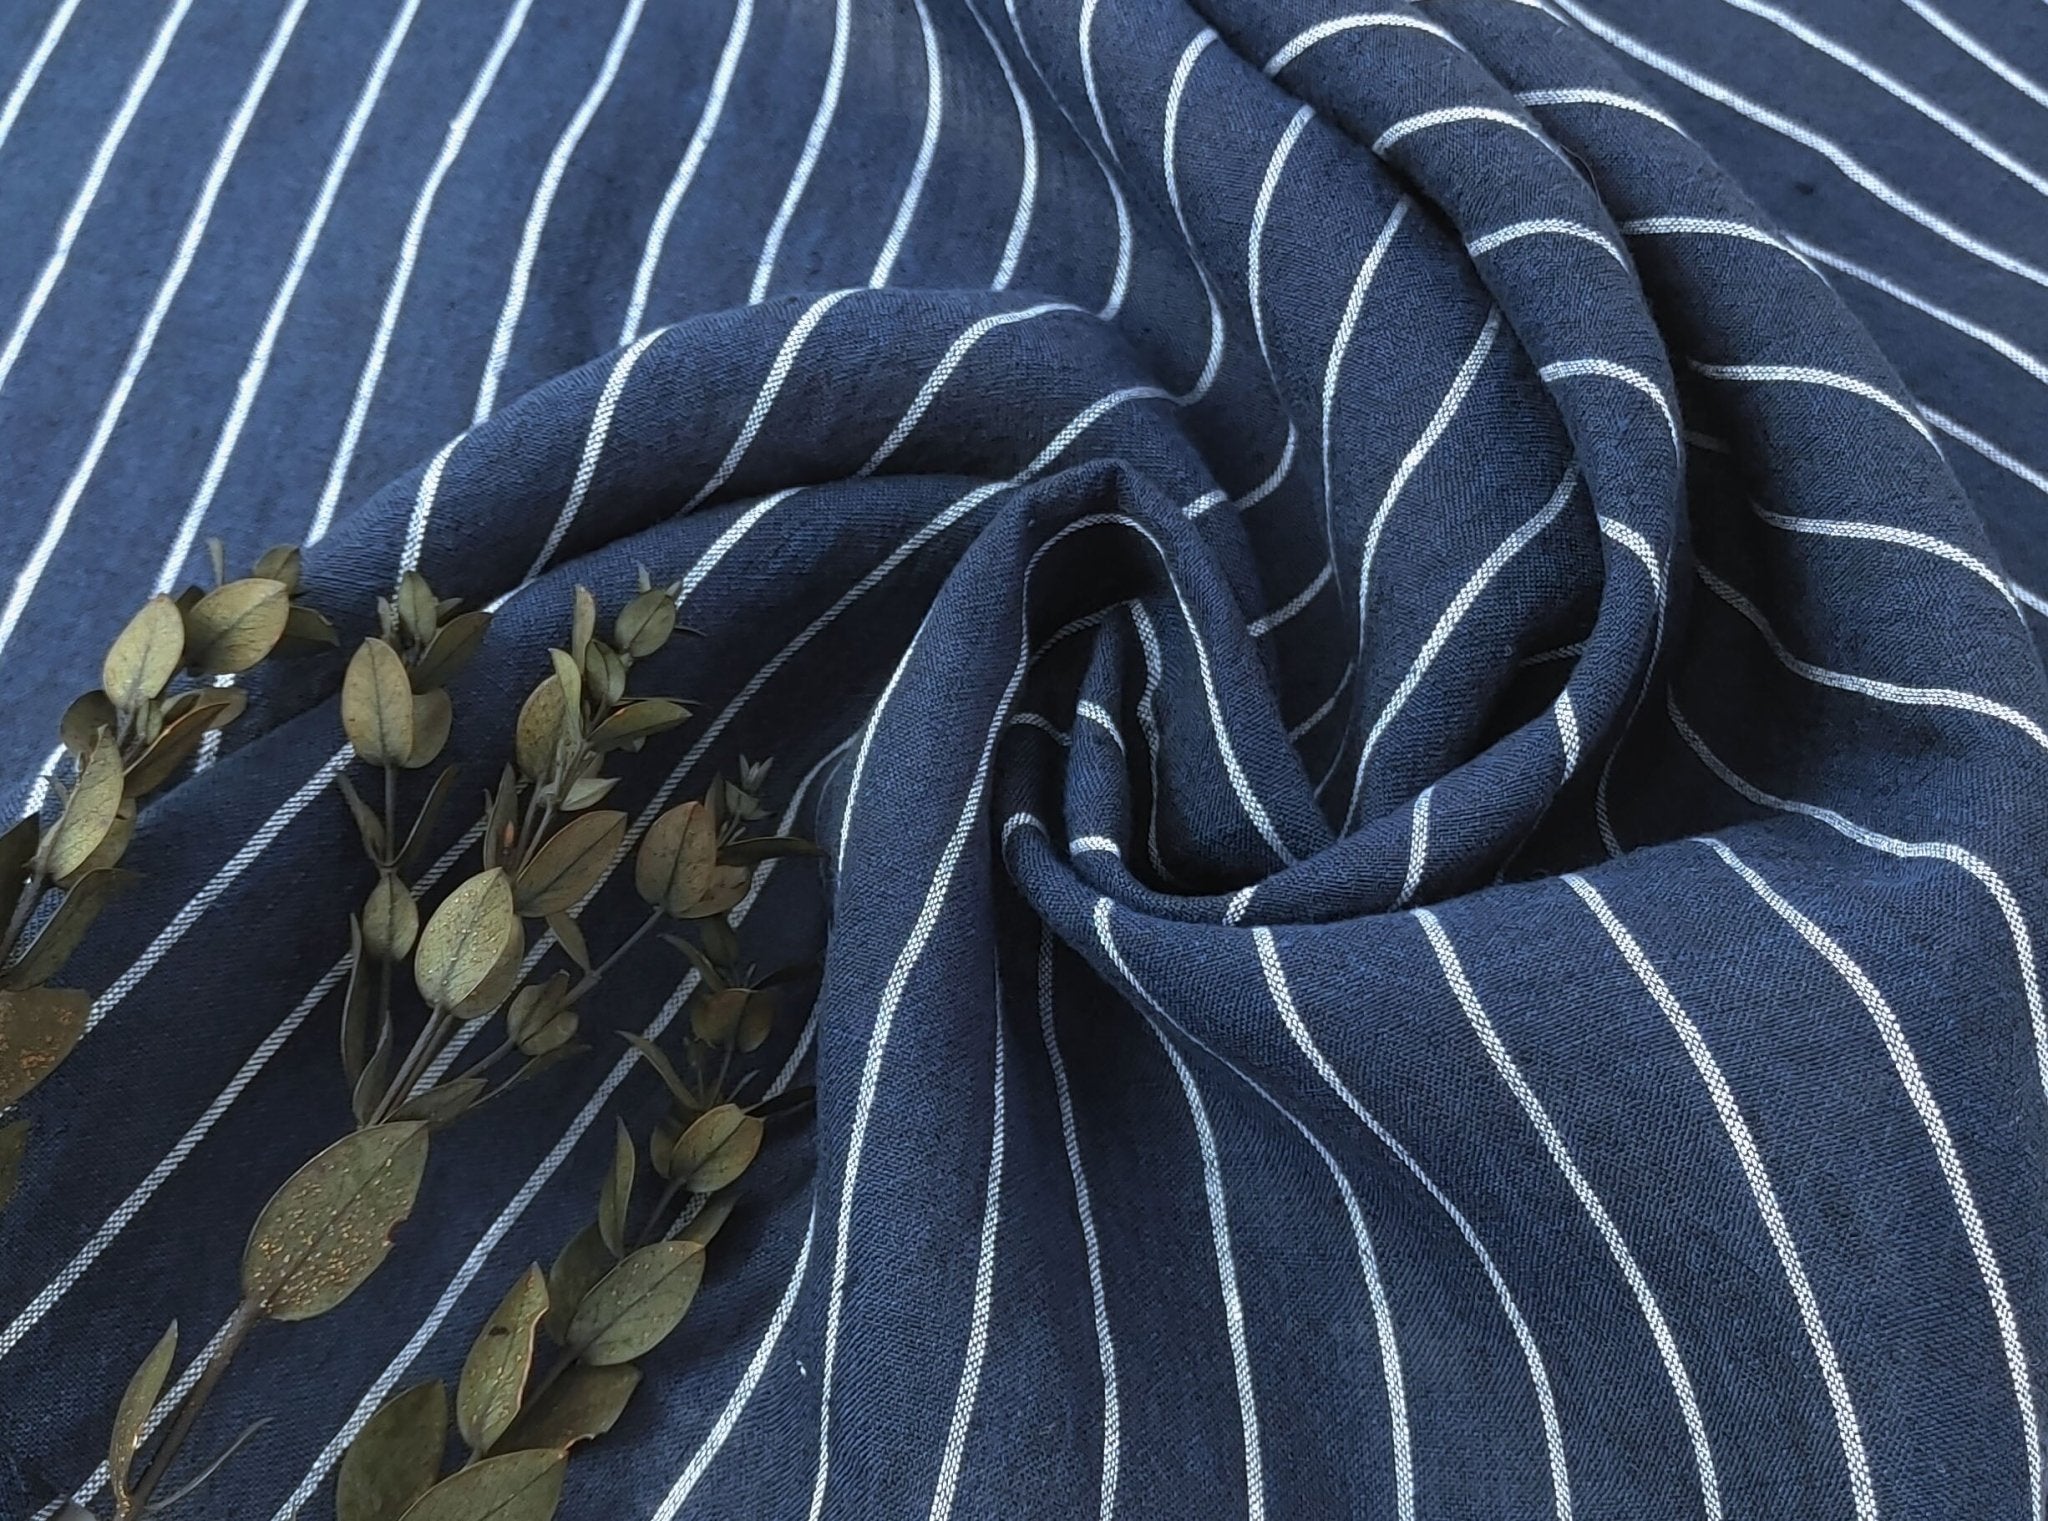 Navy Blue & White Striped Linen Fabric - 100% Natural, 21S Thread for Classic Style 7841 - The Linen Lab - Navy